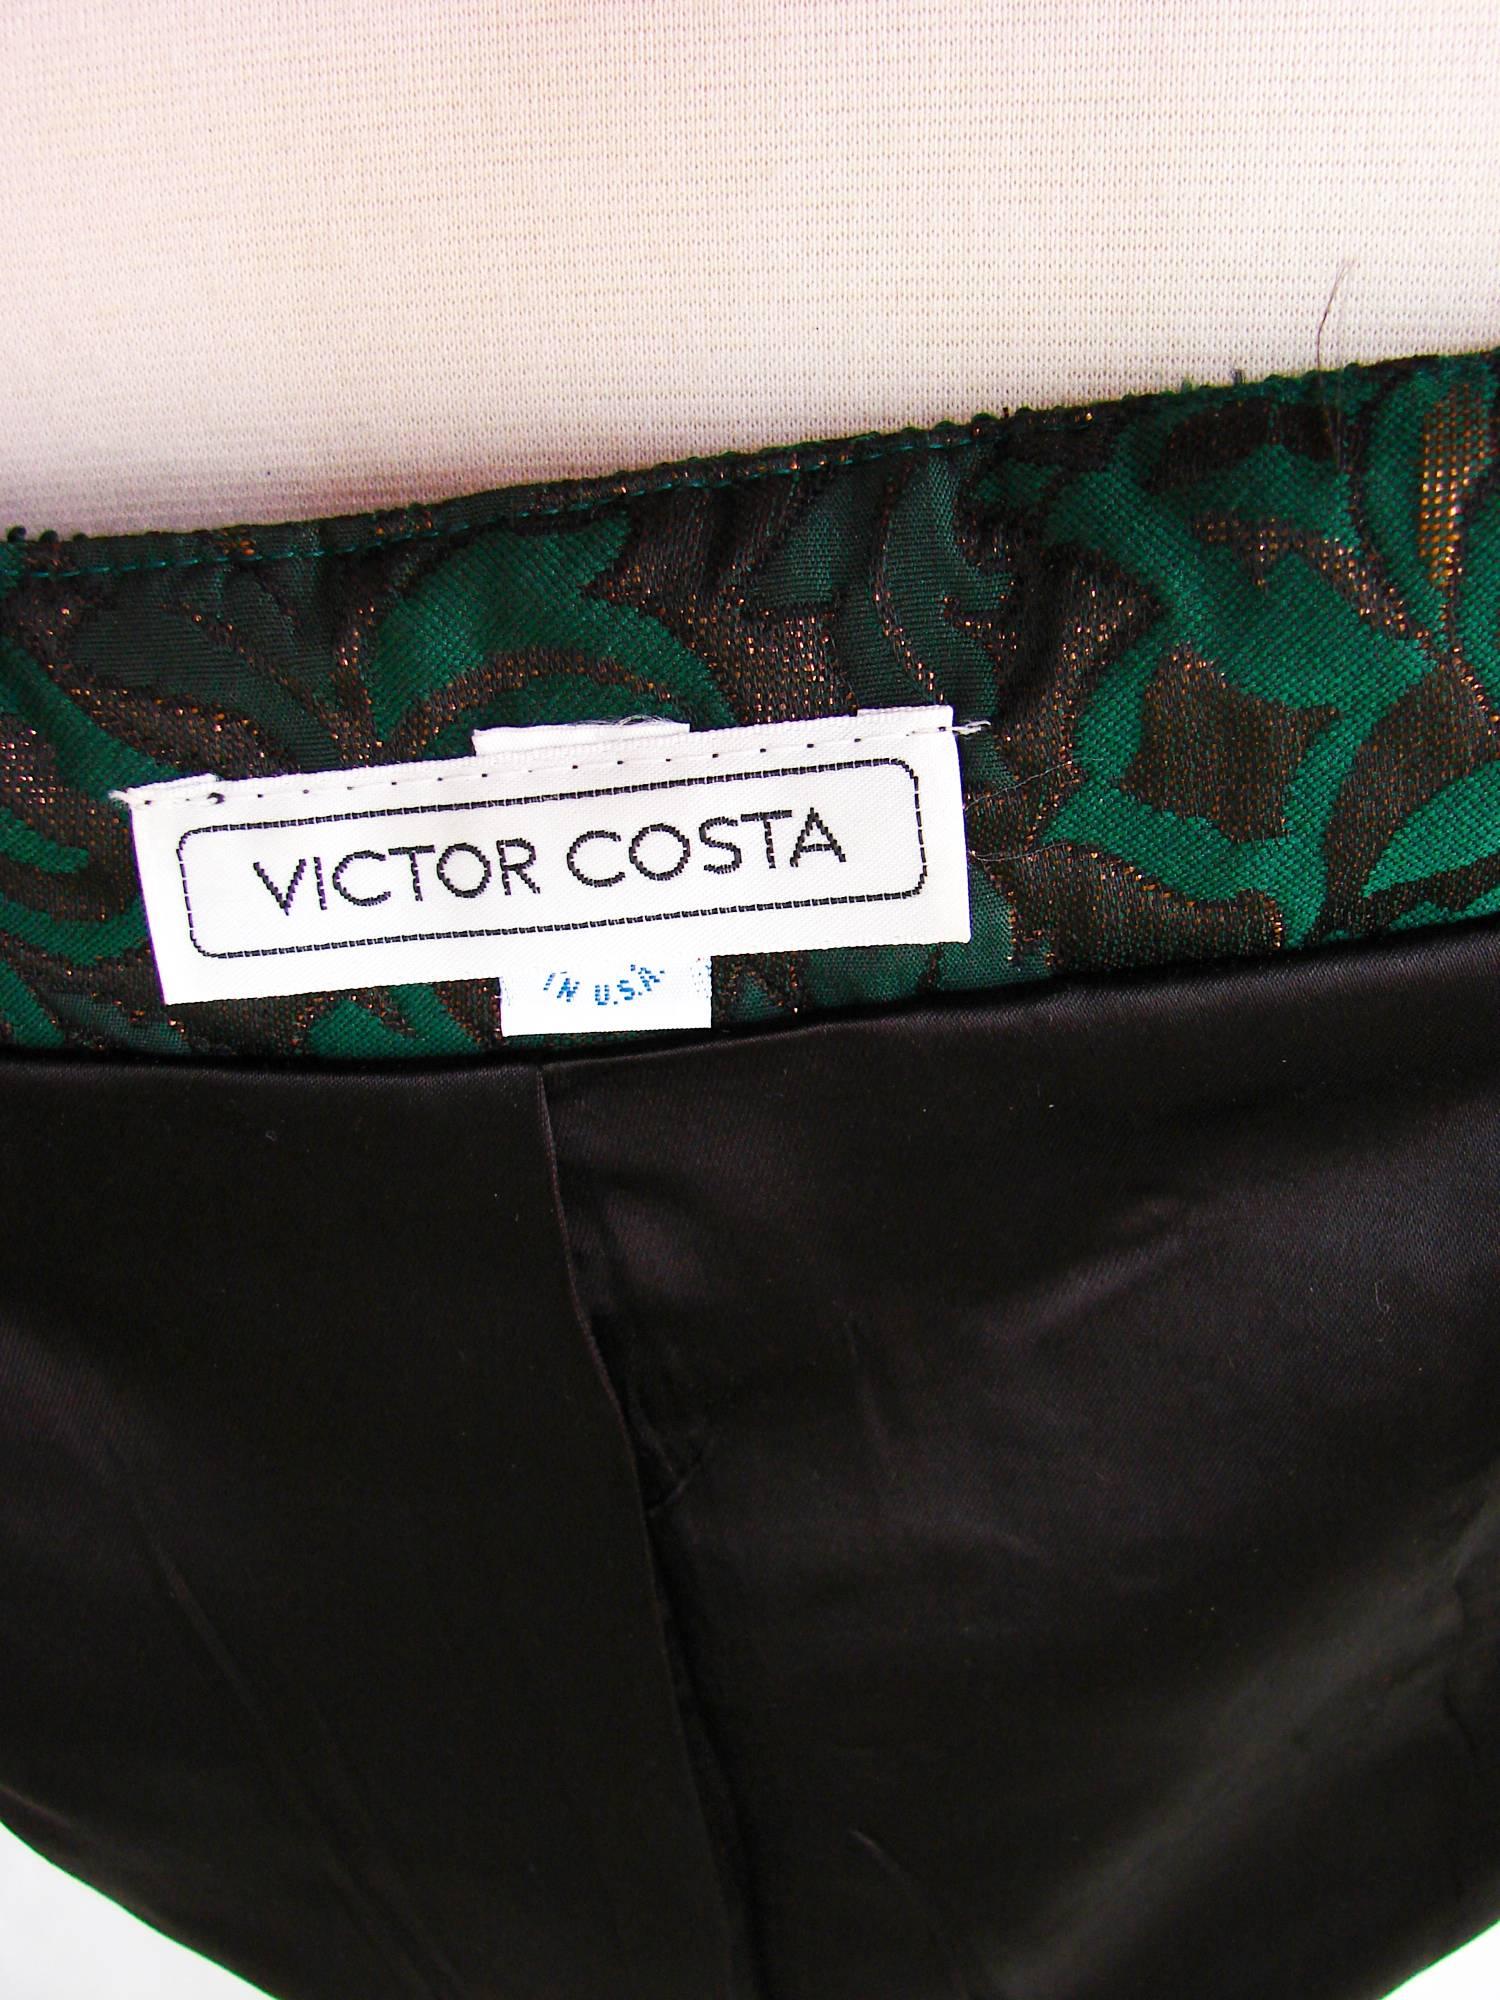 VICTOR COSTA Corset Top Puff Sleeves & Embroidery Romantic Formal VTG 1980s Sz 6 4